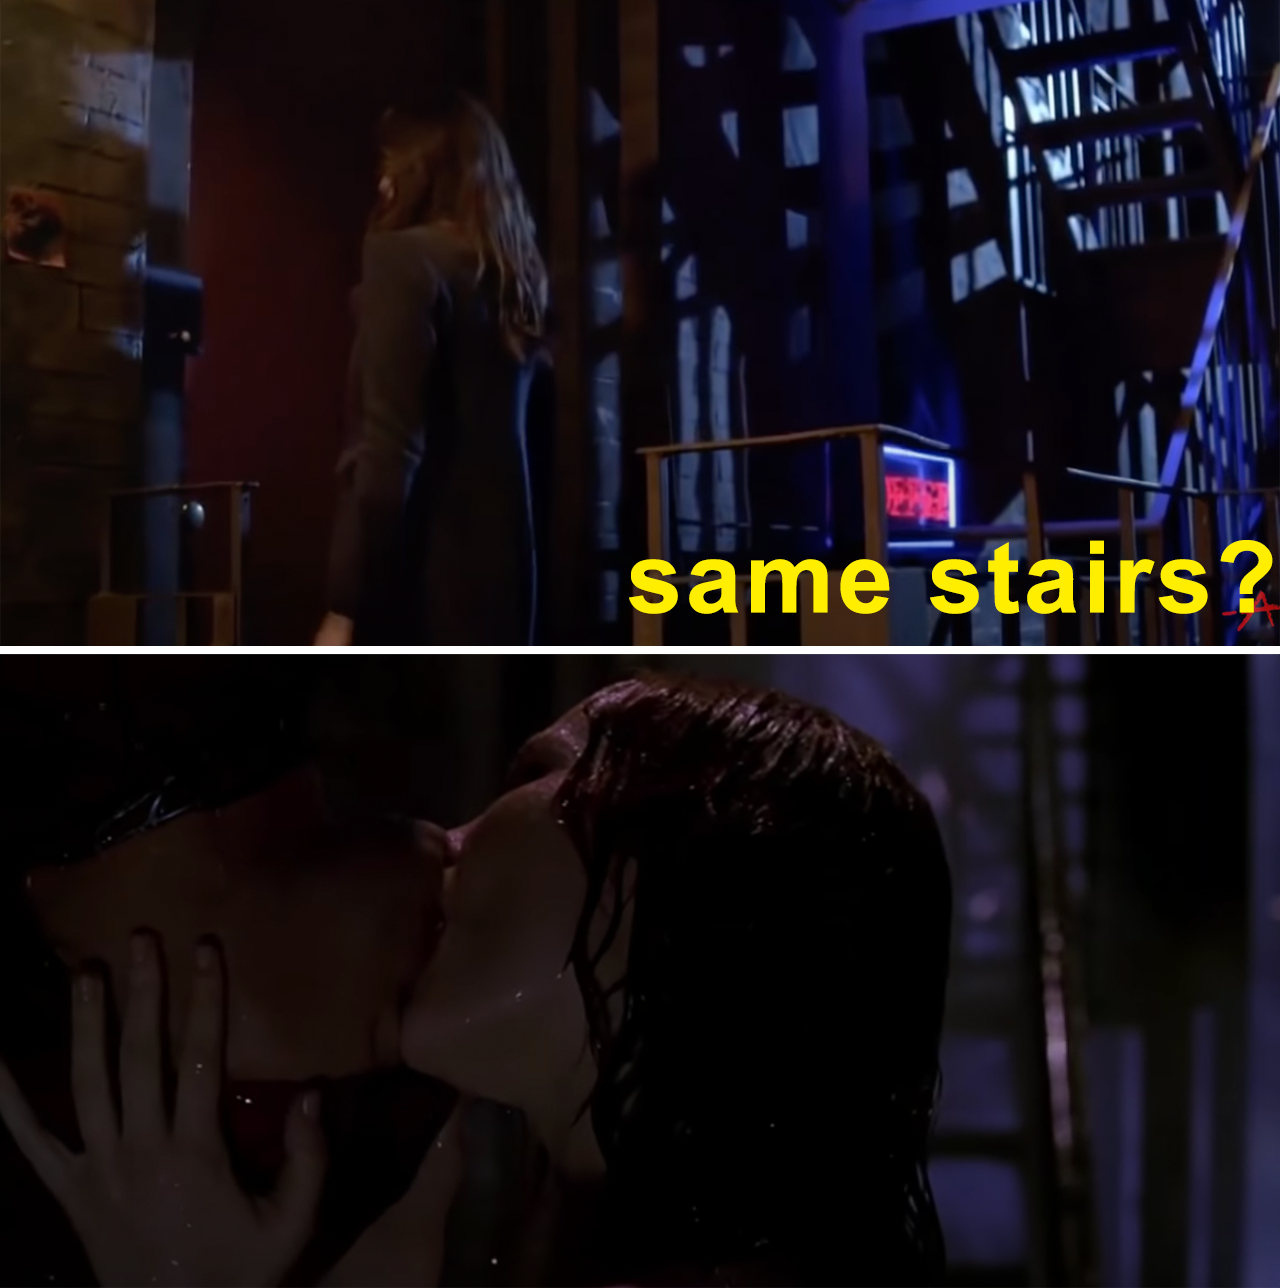 The top image shows Spencer standing on a fire escape in front of a door, and. the second scene shows Spider-Man kissing Mary-Jane, with a similar fire escape in the background.